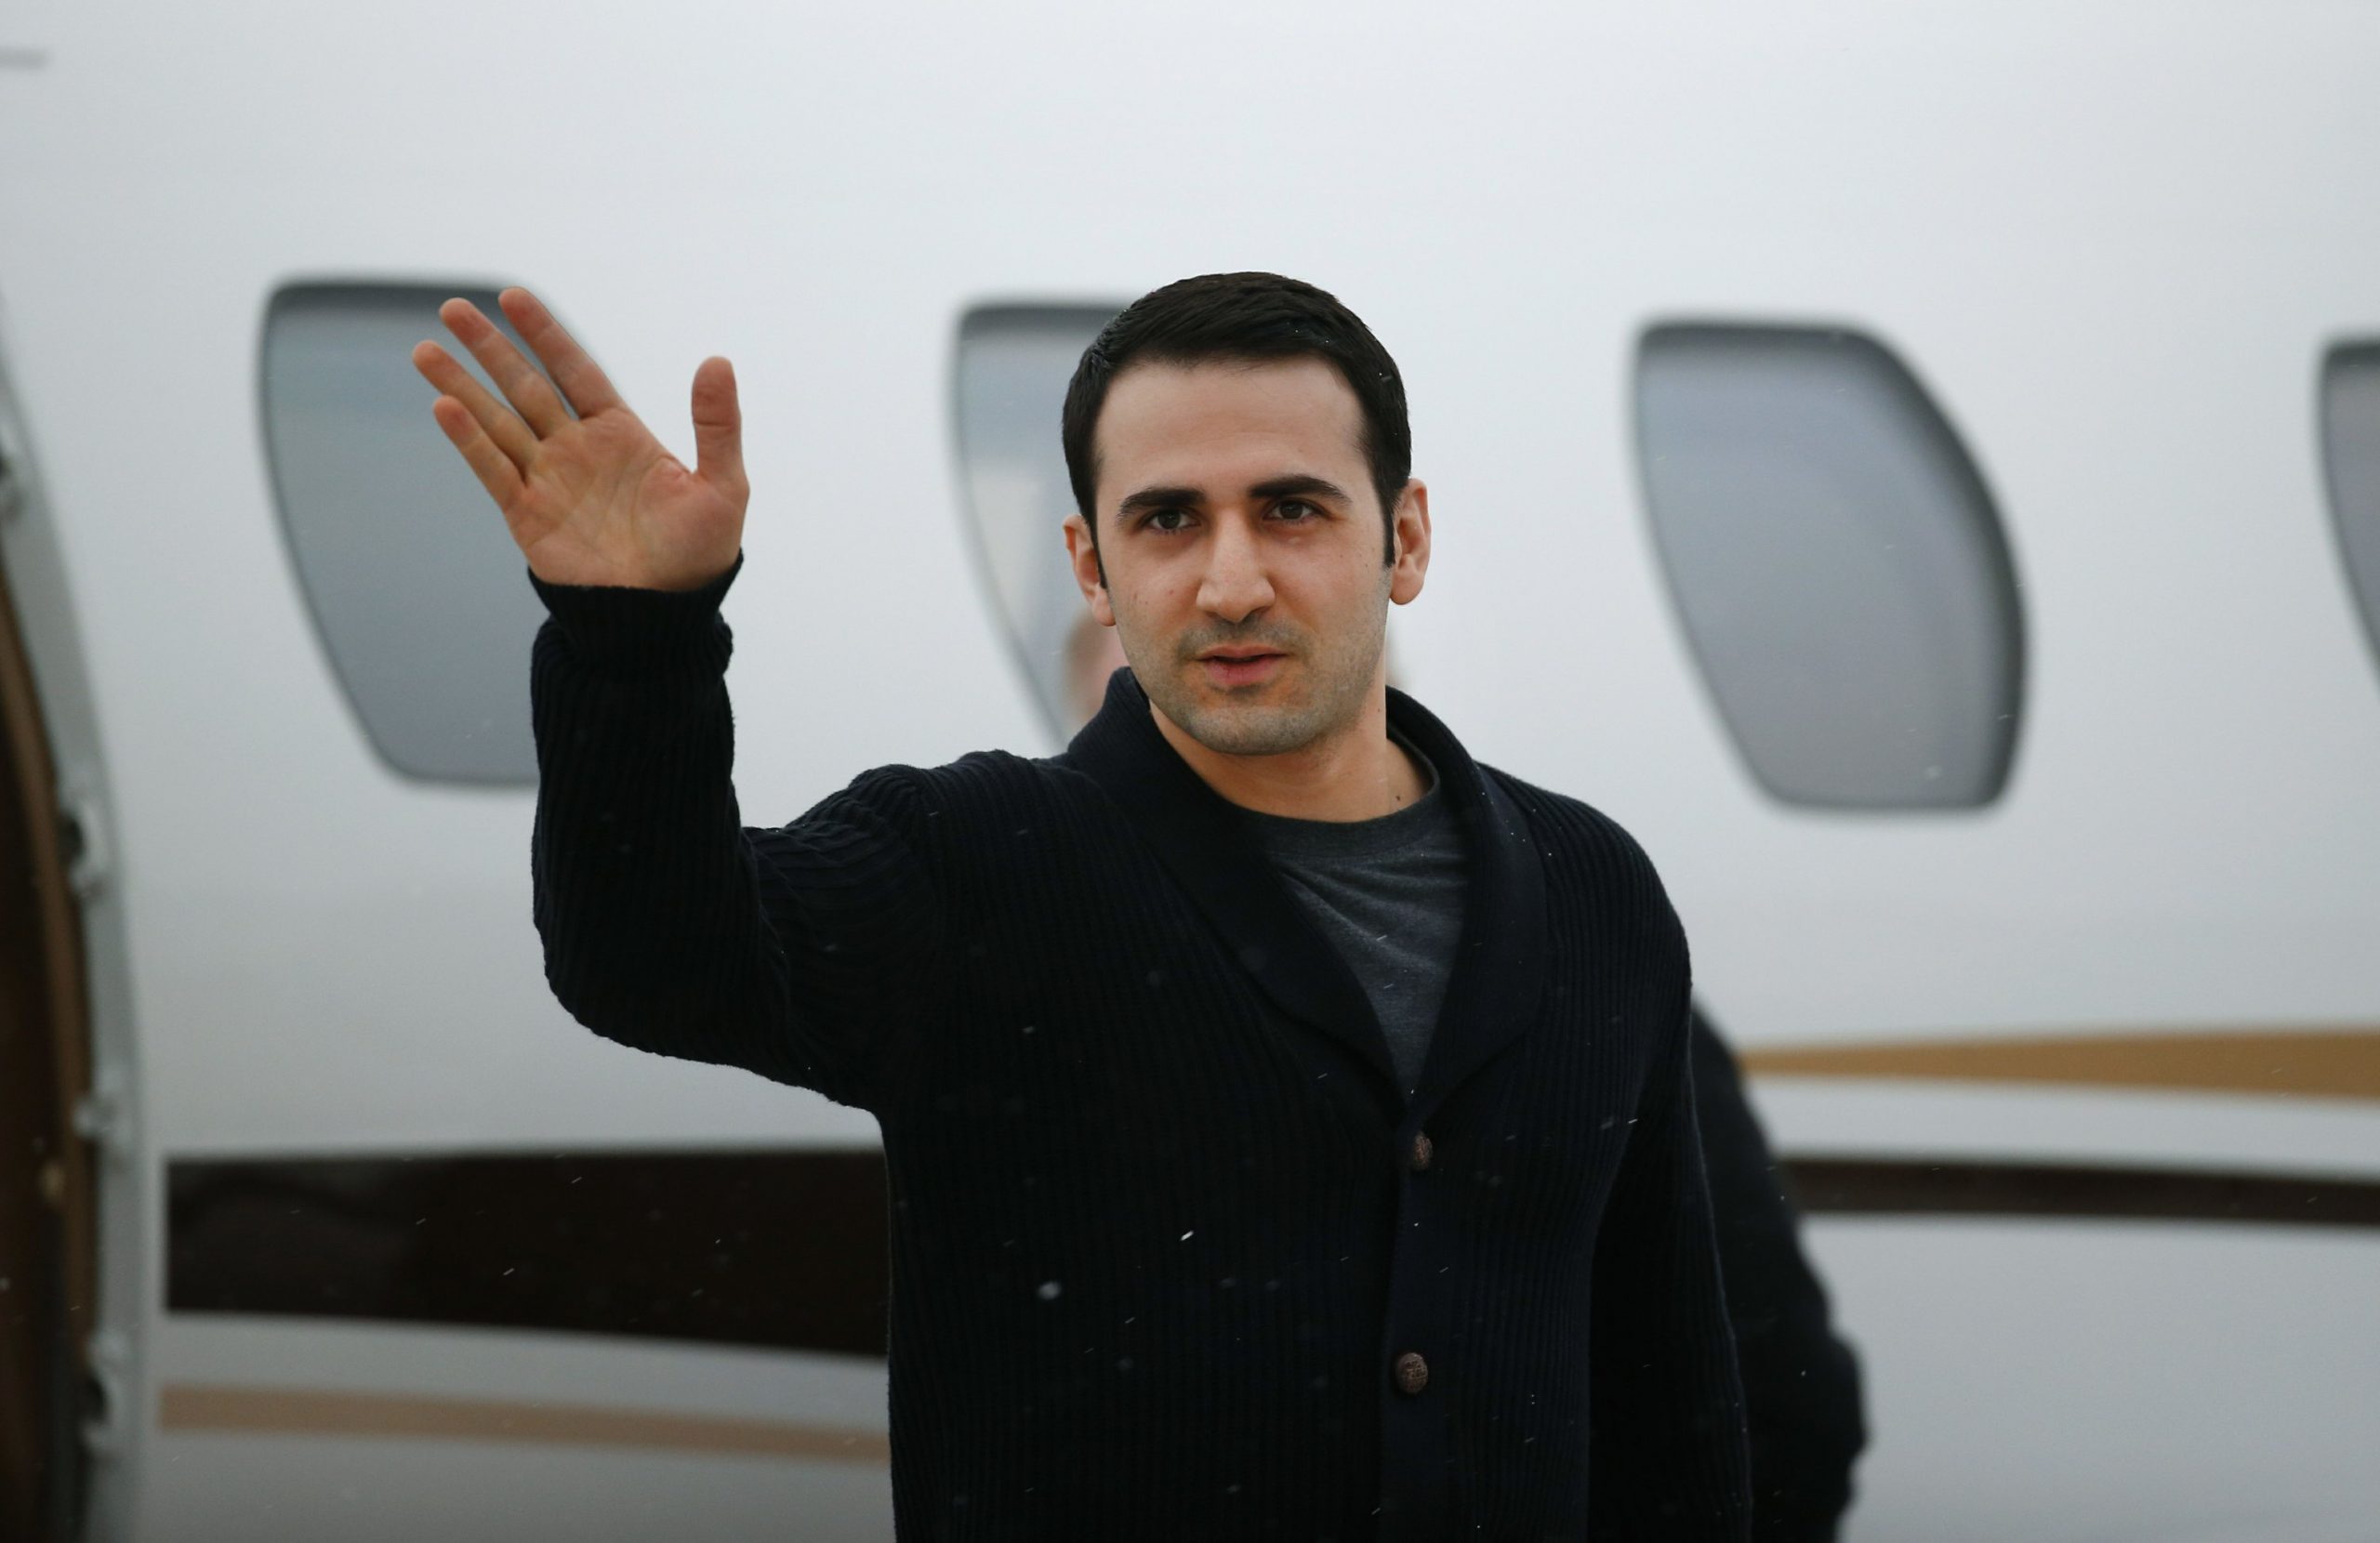 Once held in Iranian jail, ex-Marine fights espionage claims…